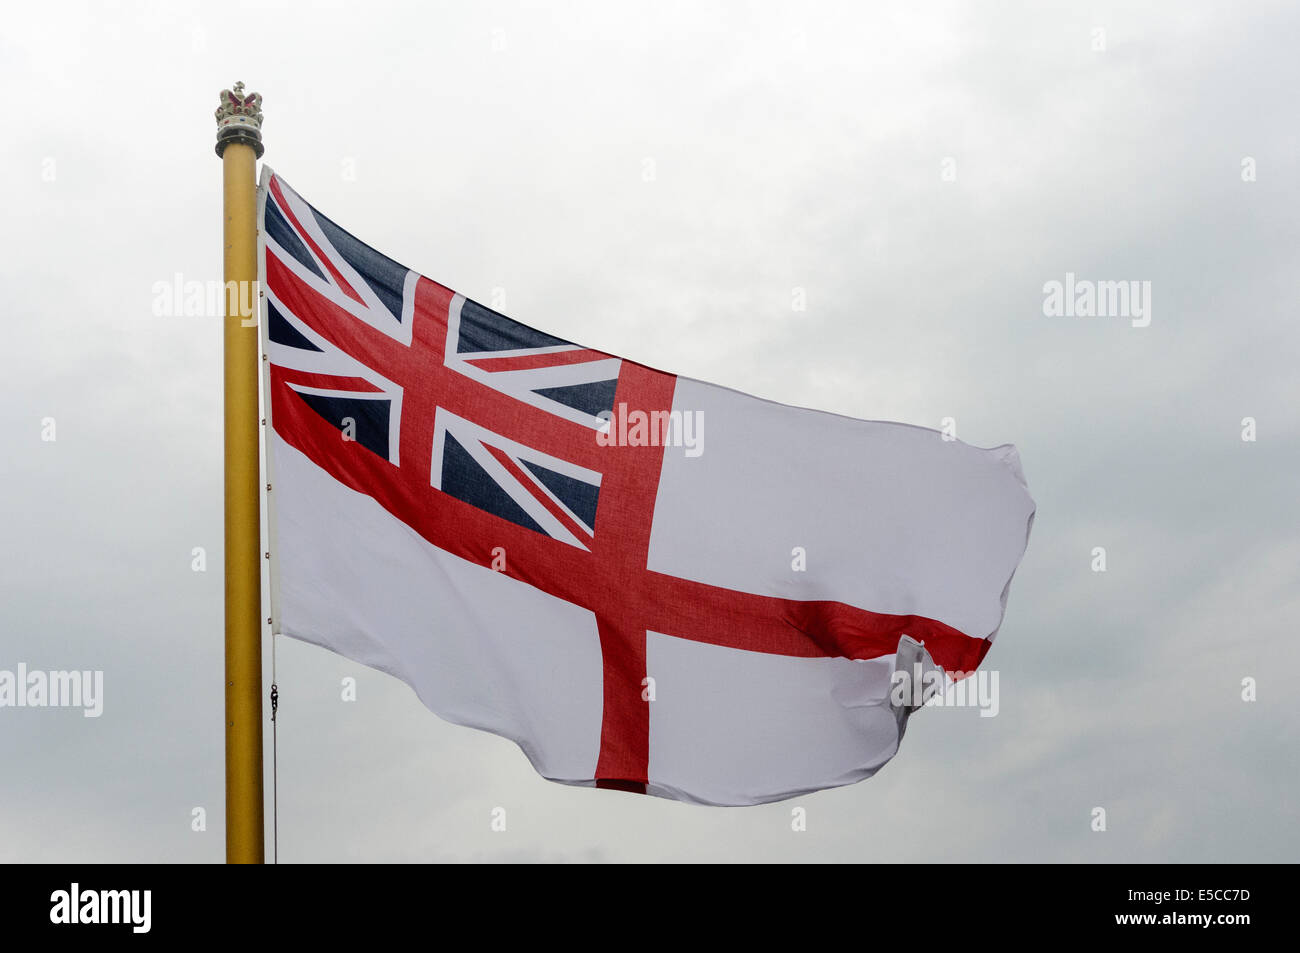 Belfast, Northern Ireland. 26/07/2014 - The White Ensign flies on the aft of a Royal Navy ship. Credit:  Stephen Barnes/Alamy News Stock Photo